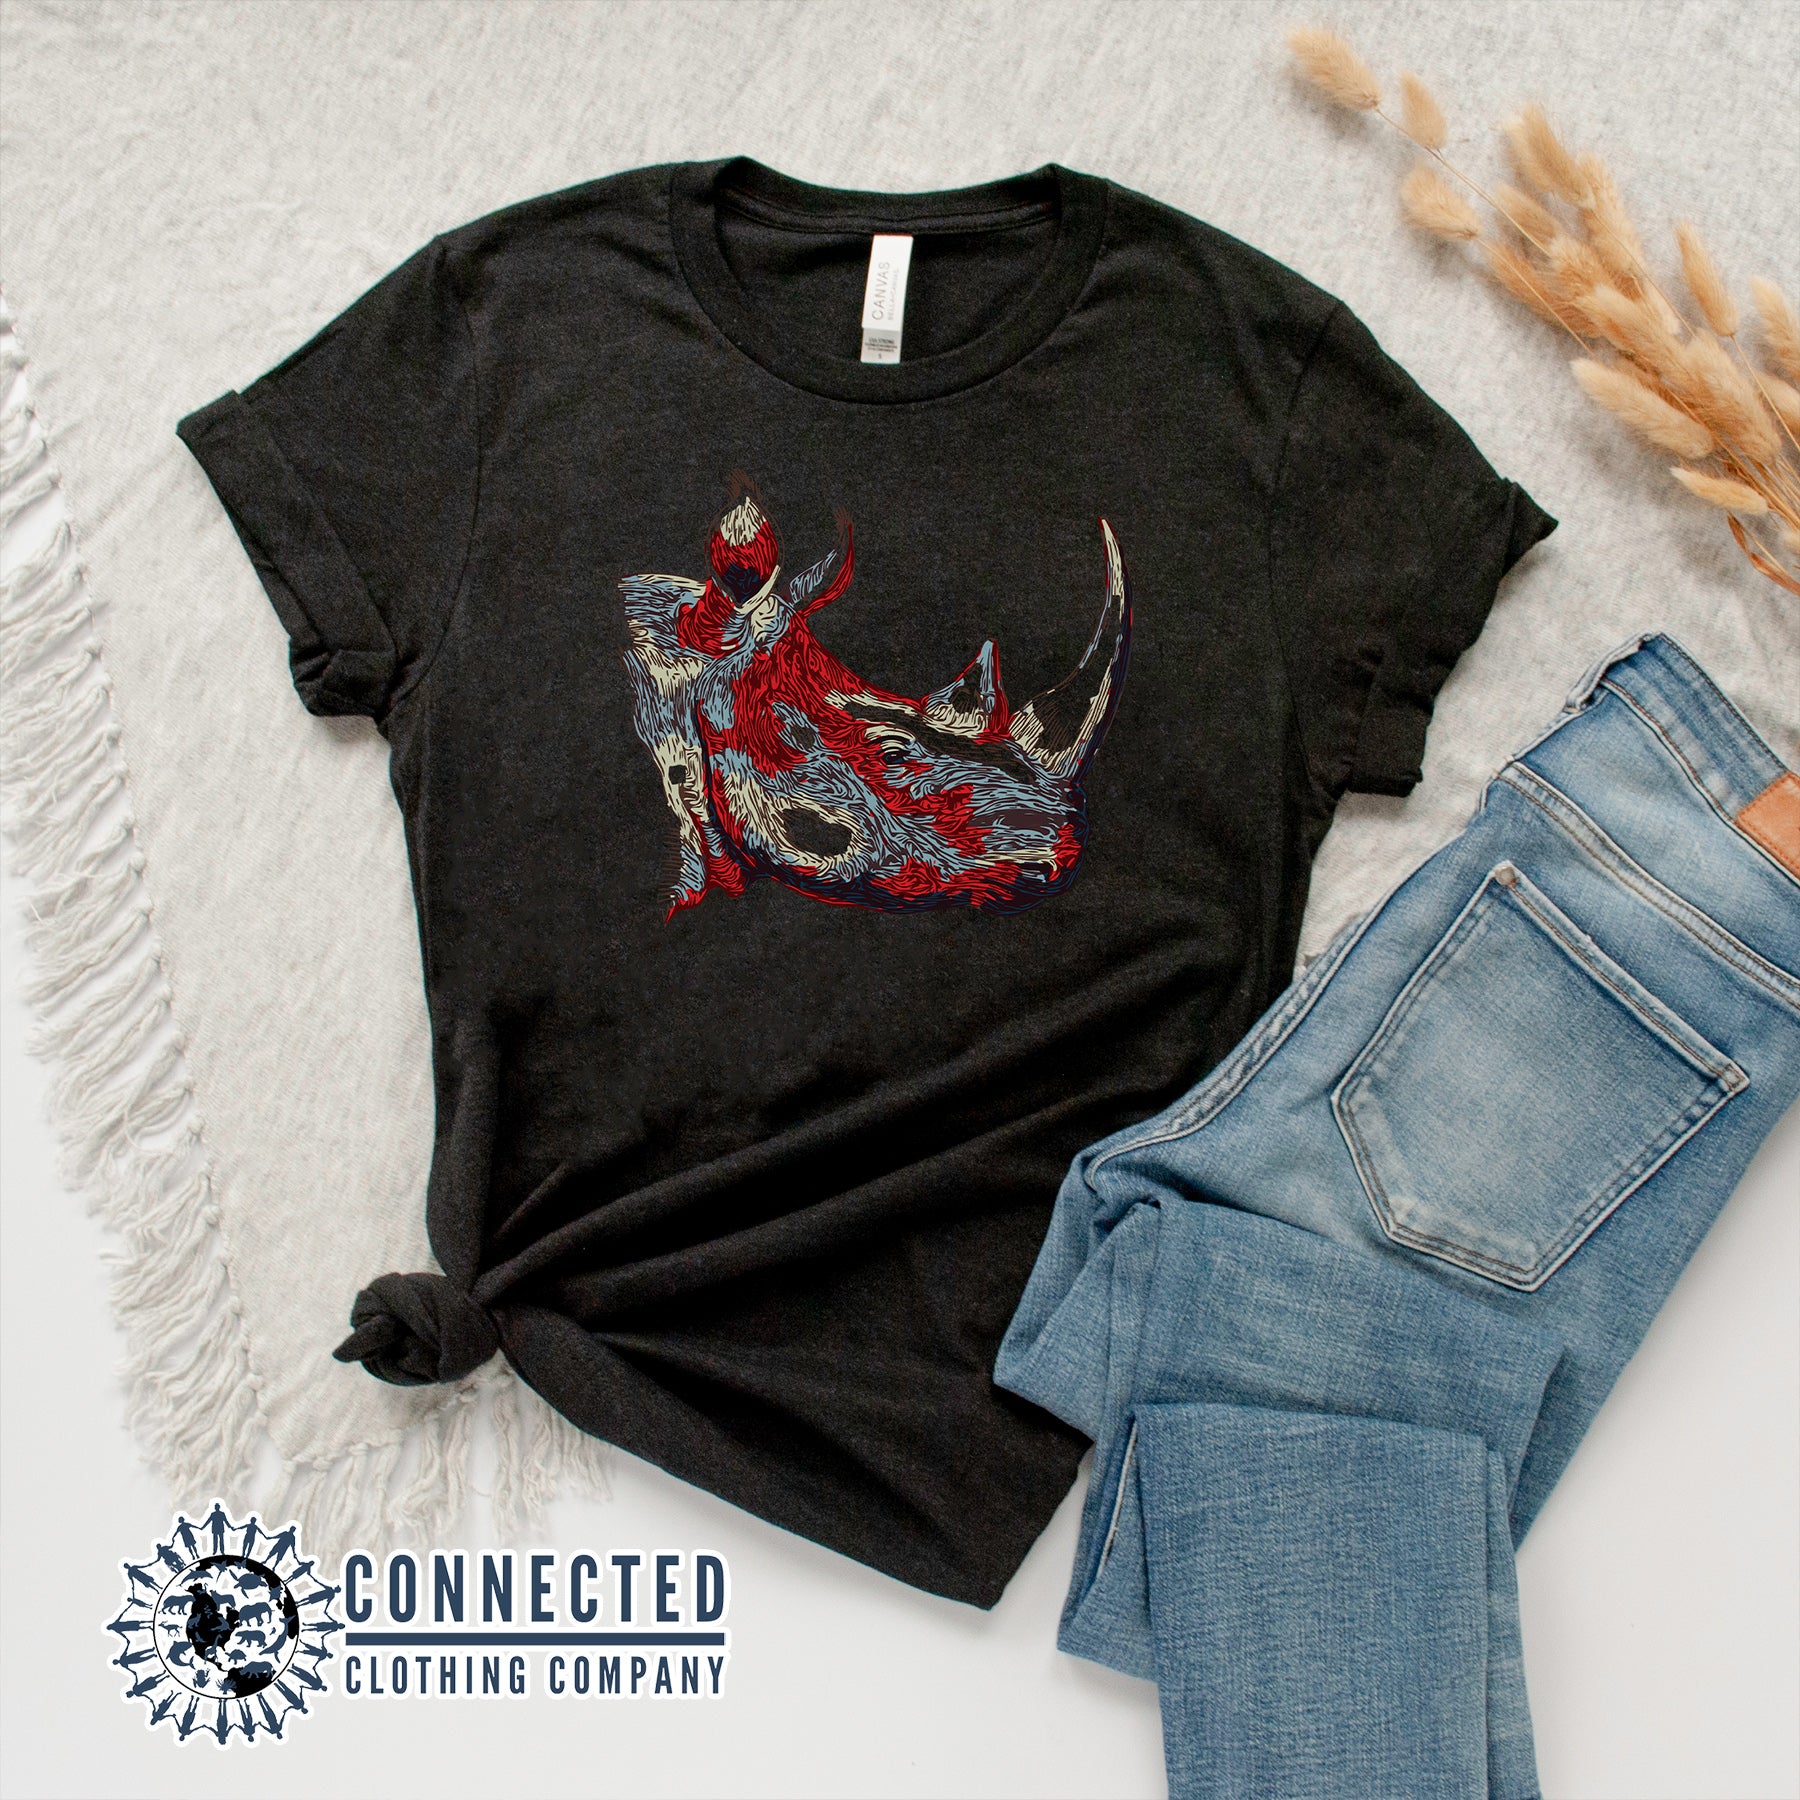 Black Vanishing Into Extinction Rhino Tshirt - Connected Clothing Company - Ethically and Sustainable Clothing - 10% of proceeds are donated to rhino conservation